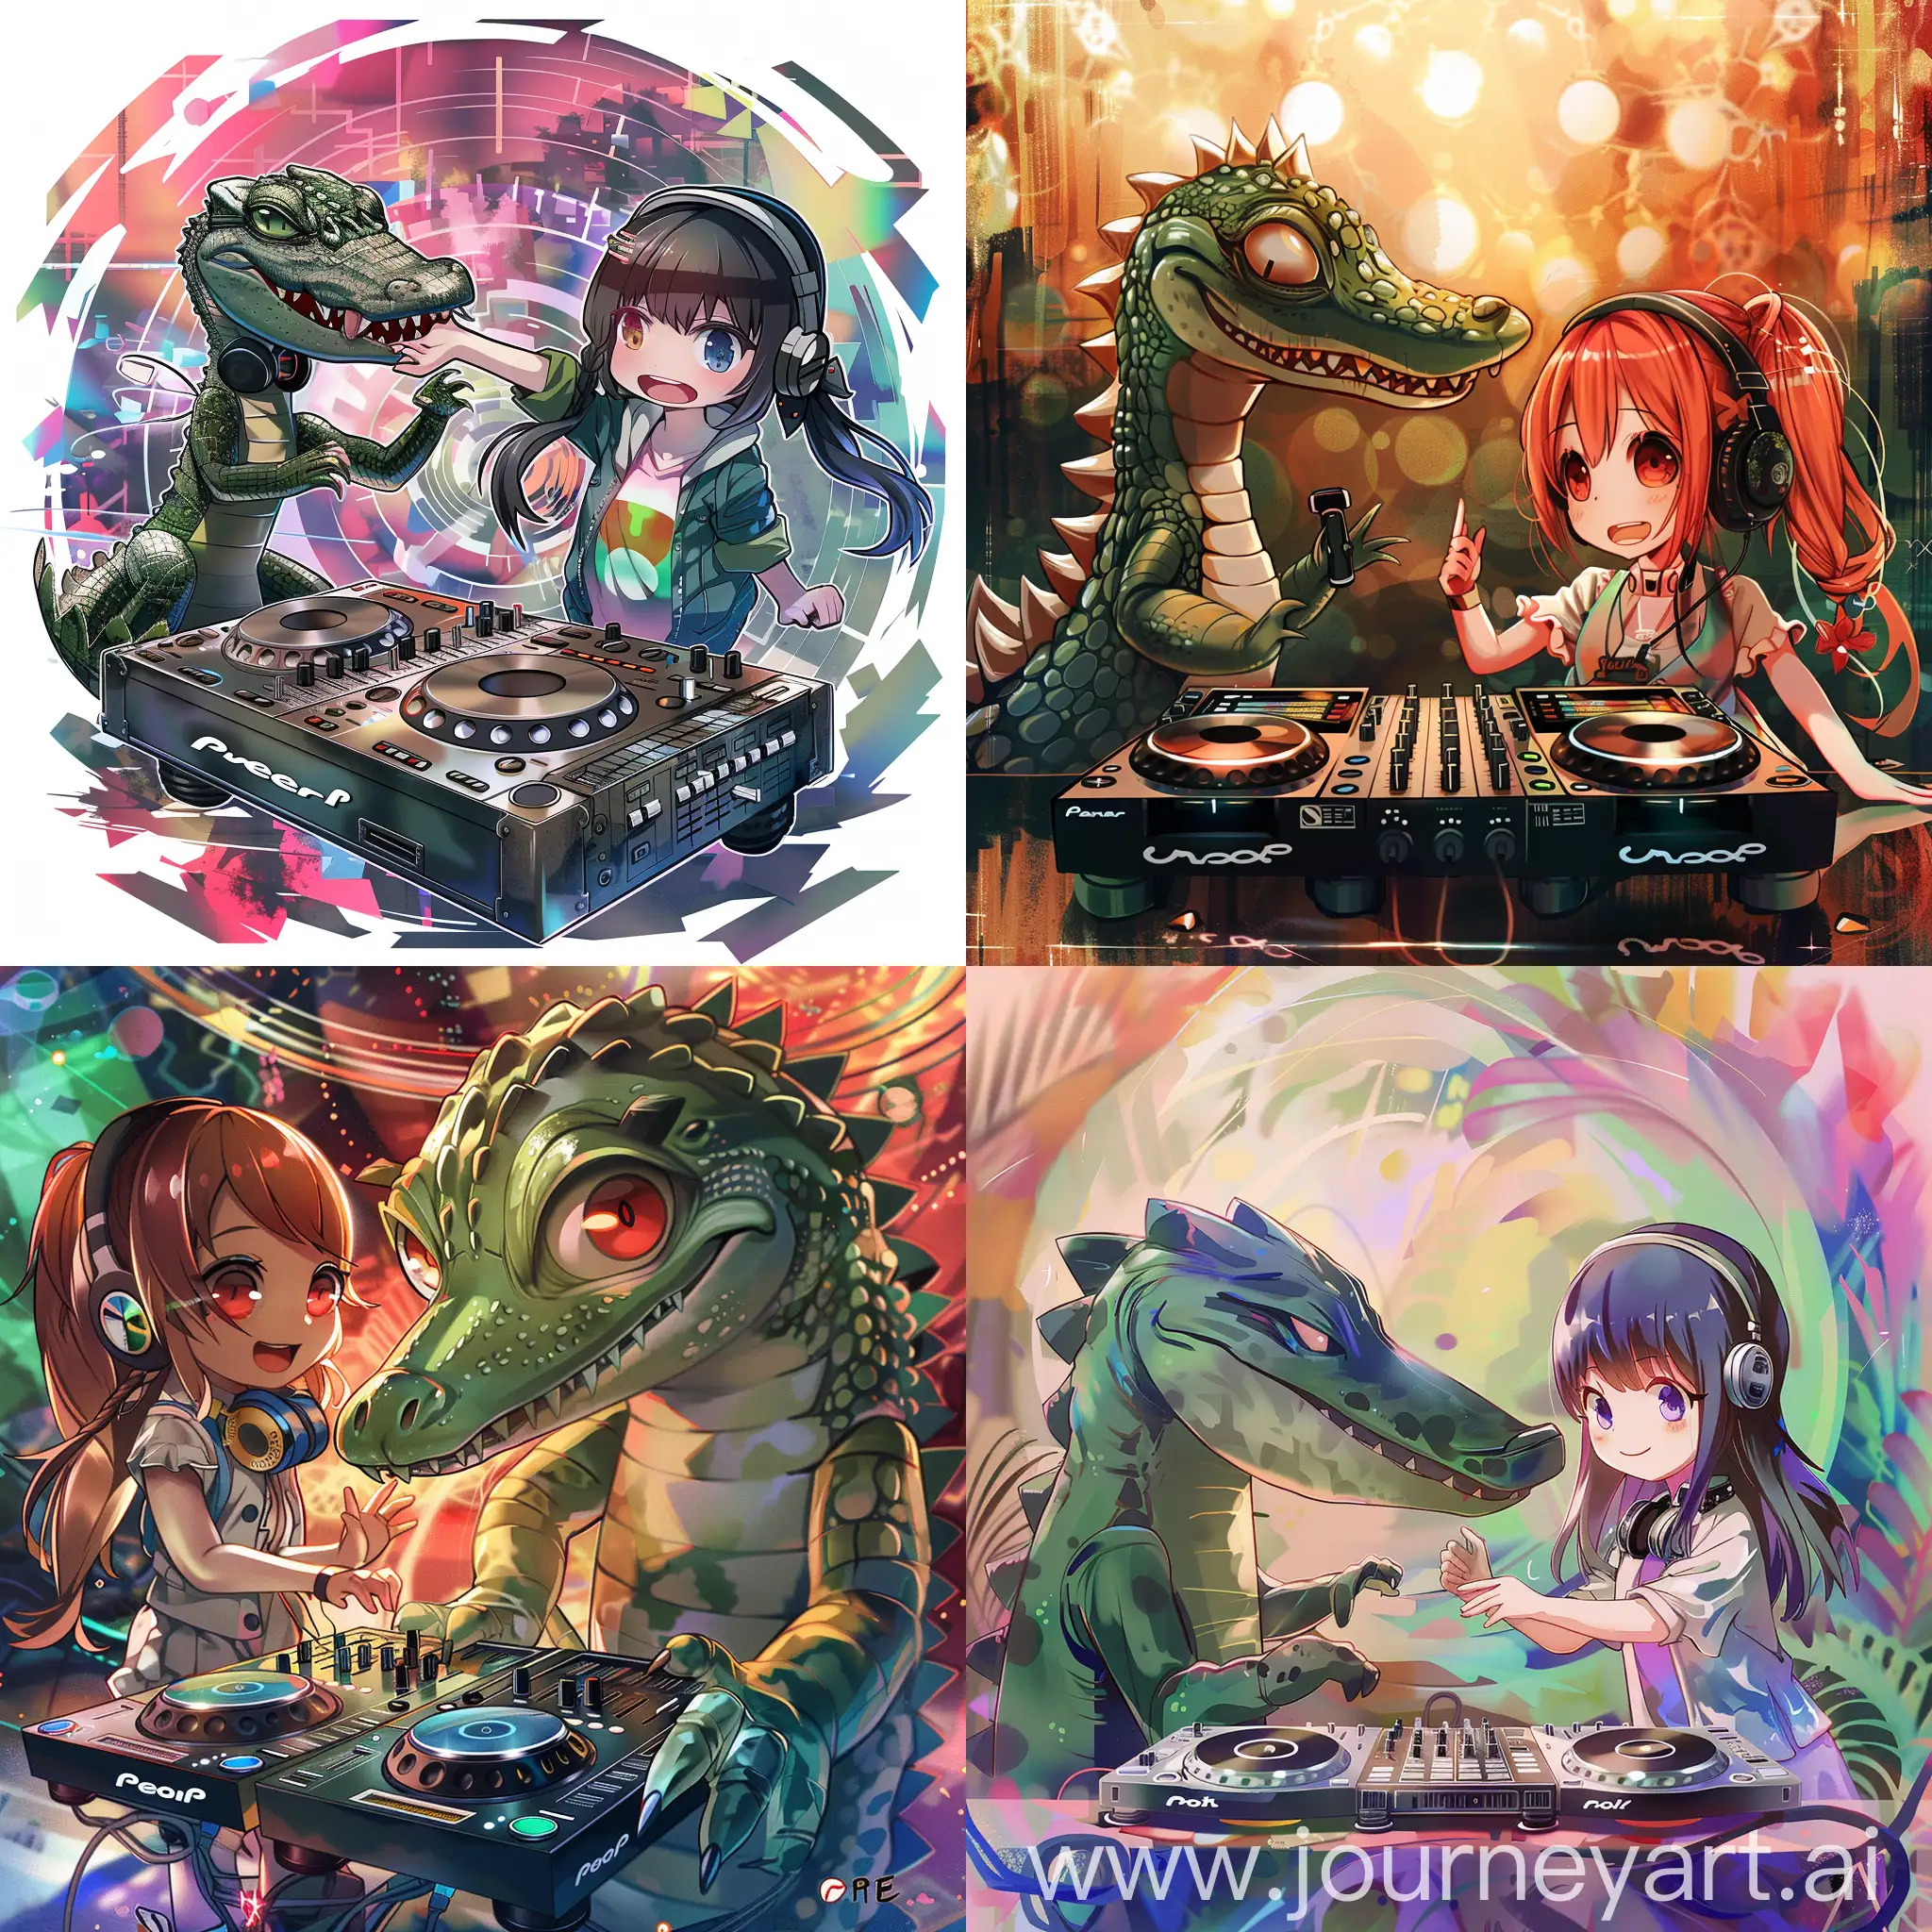 Chibi-Alligator-and-Anime-Girl-Playing-DJ-in-Abstract-Background